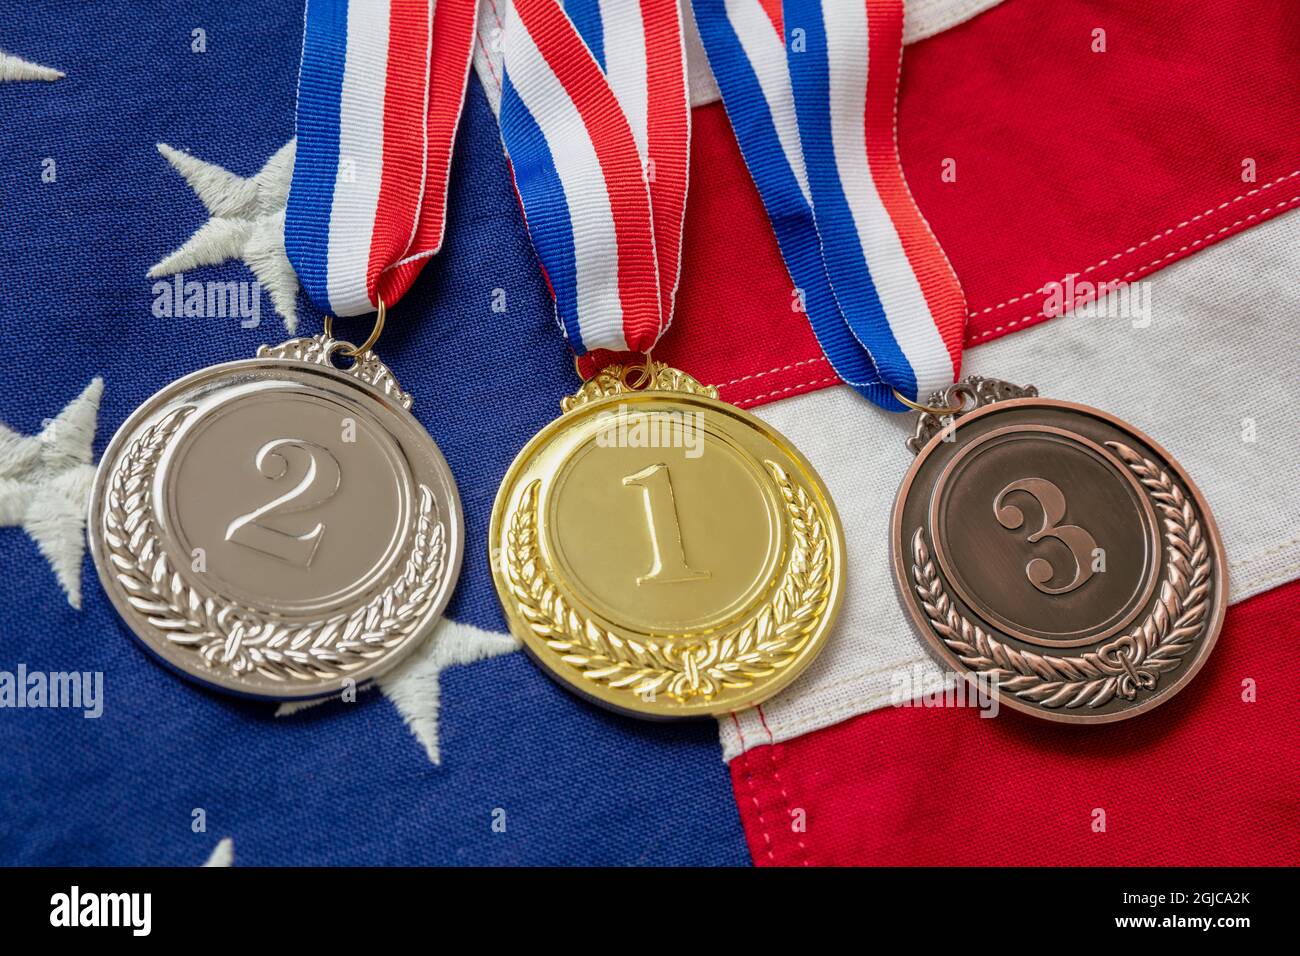 Medals set, USA flag. Gold, silver and bronze on American symbol. Winners, United States athletes podium prize trophy concept. Stock Photo